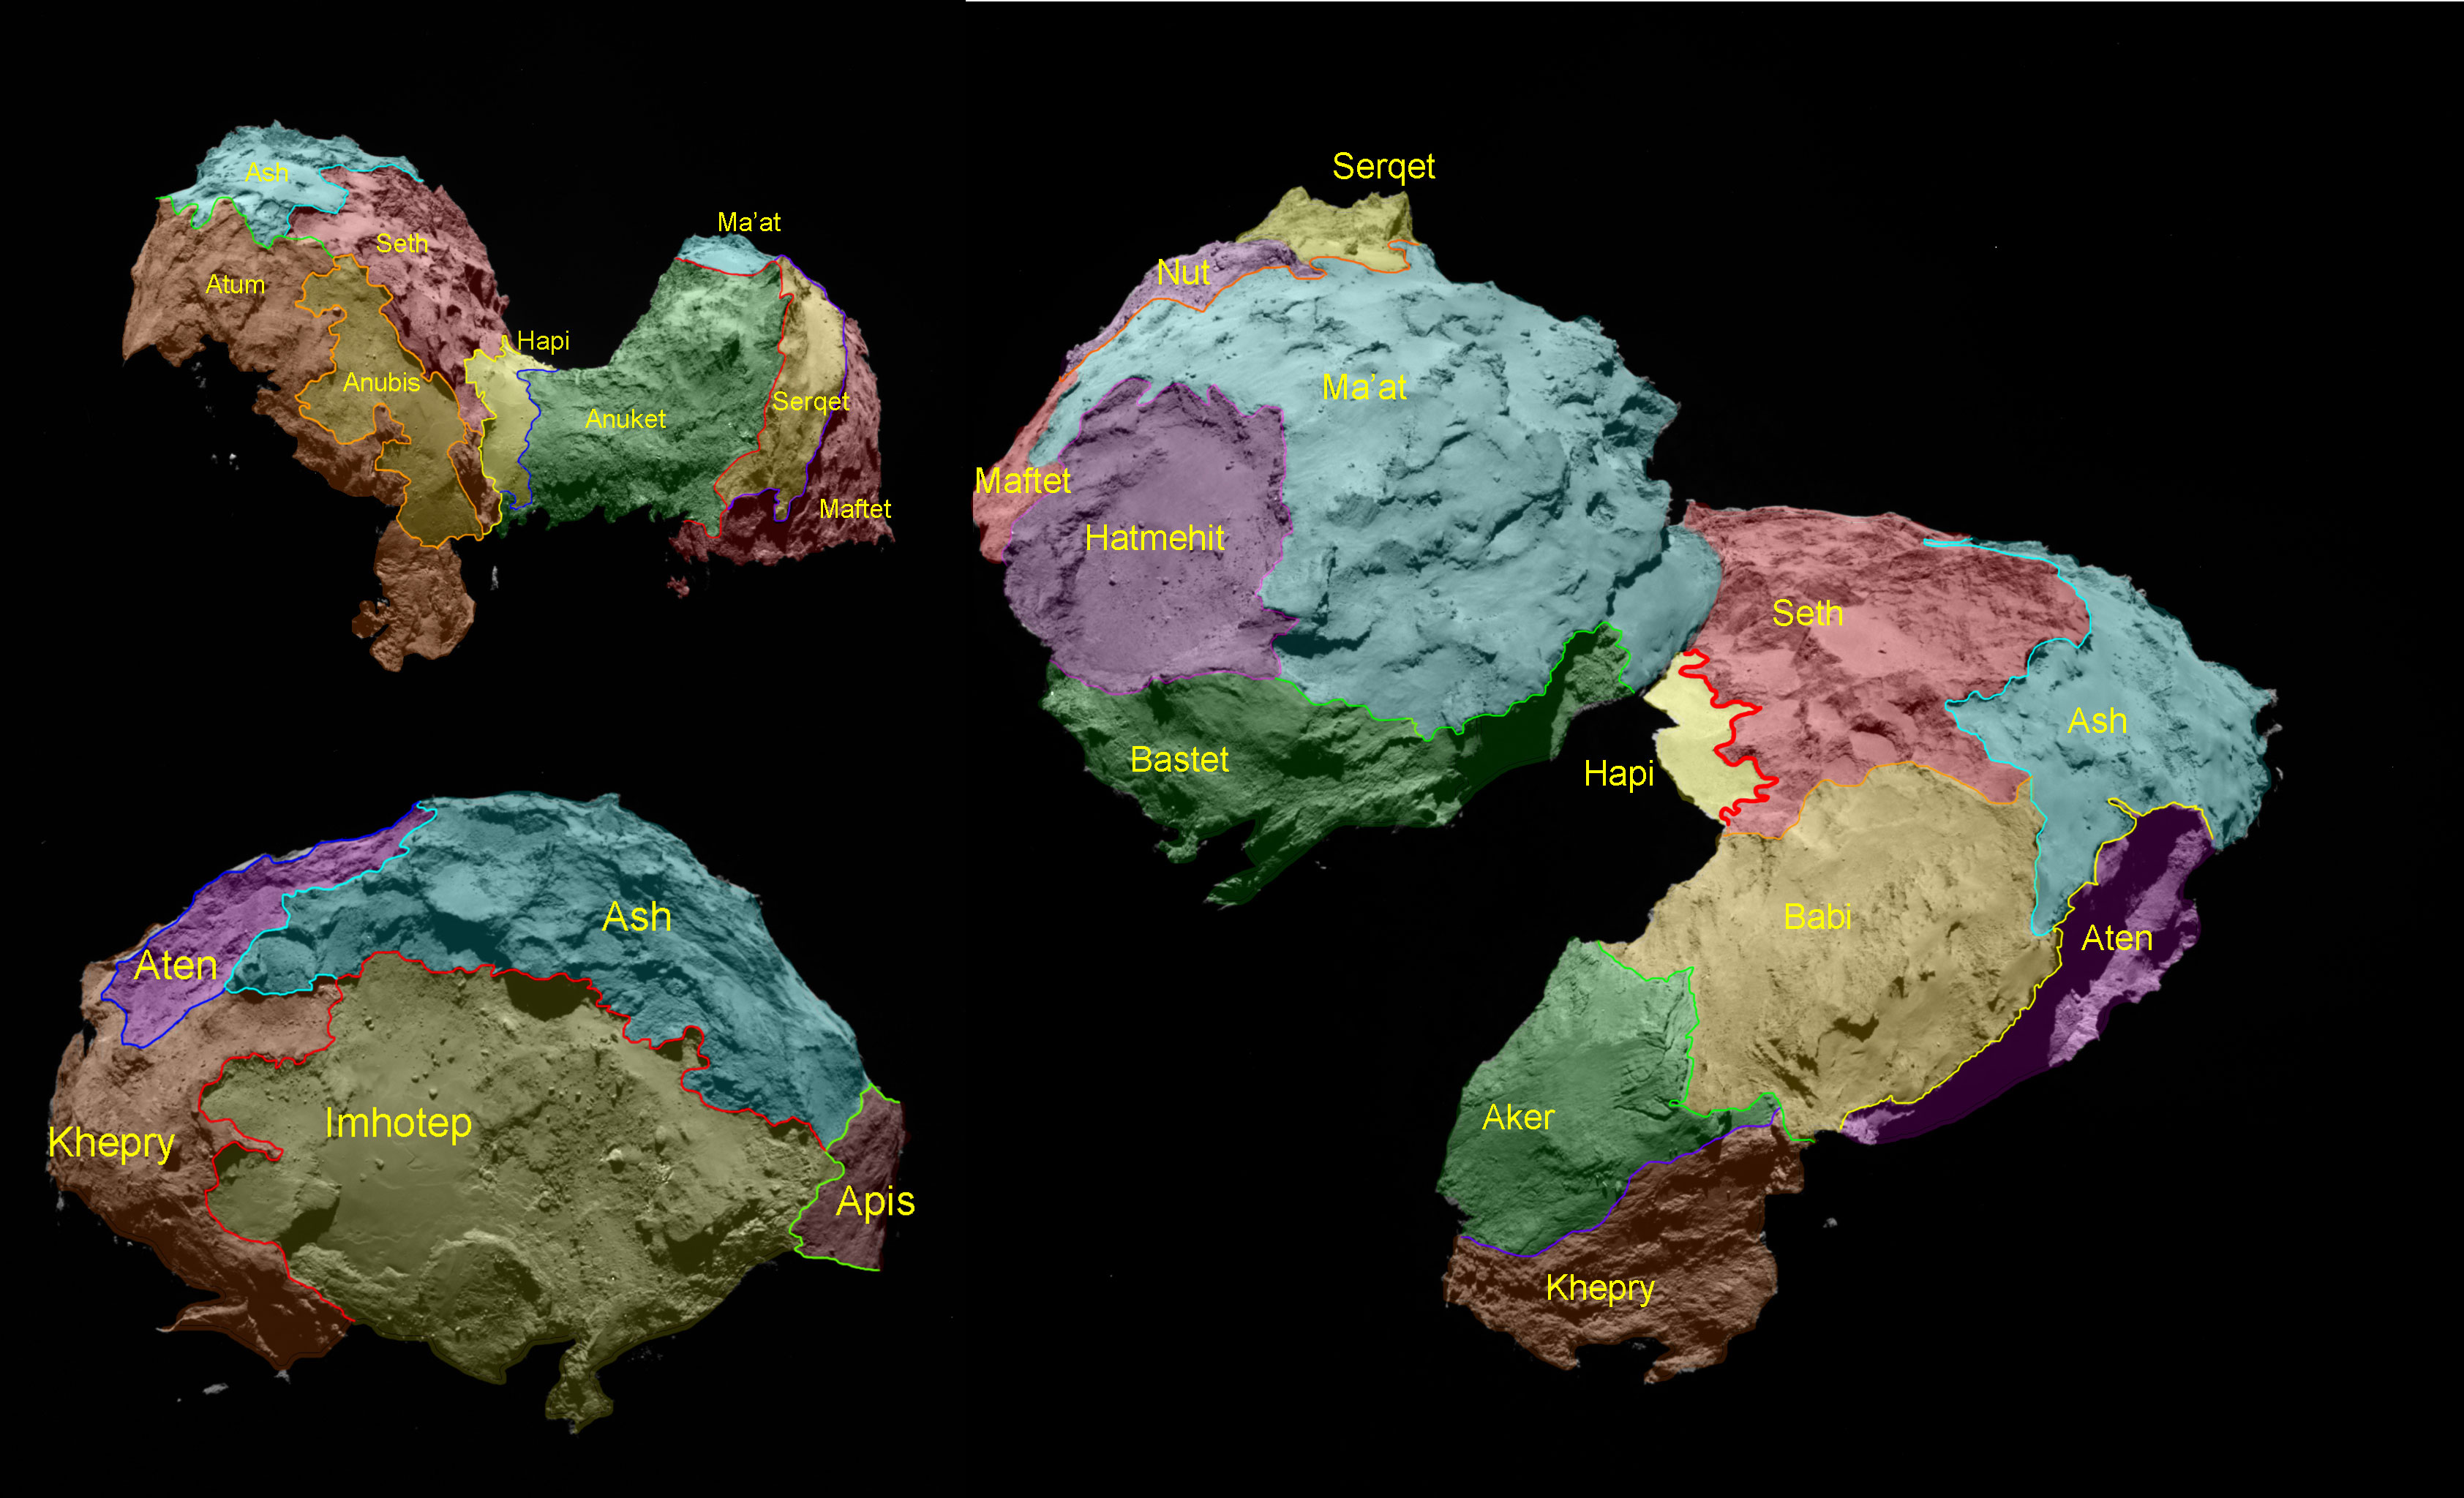 The 19 regions identified on Comet 67P/Churyumov–Gerasimenko are separated by distinct geomorphological boundaries. Following the ancient Egyptian theme of the Rosetta mission, they are named for Egyptian deities. Credit: ESA/Rosetta/MPS for OSIRIS Team MPS/UPD/LAM/IAA/SSO/INTA/UPM/DASP/IDA